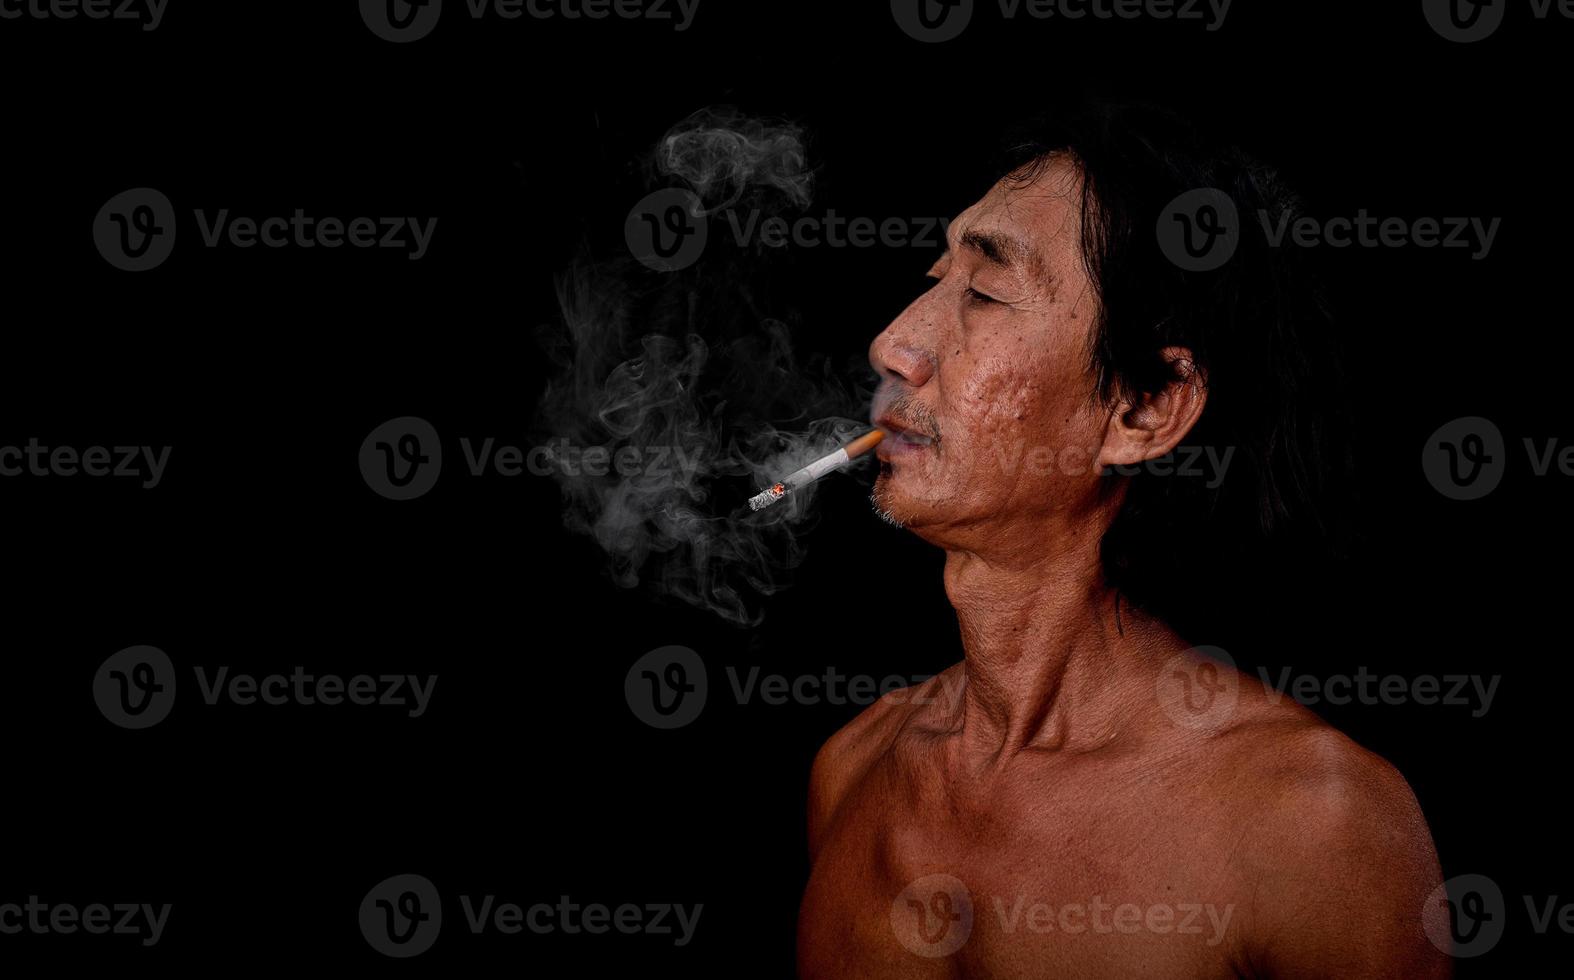 The portrait slim old man was smoking at the black background, Image of cigarette smoke spread in the mouth concept photo